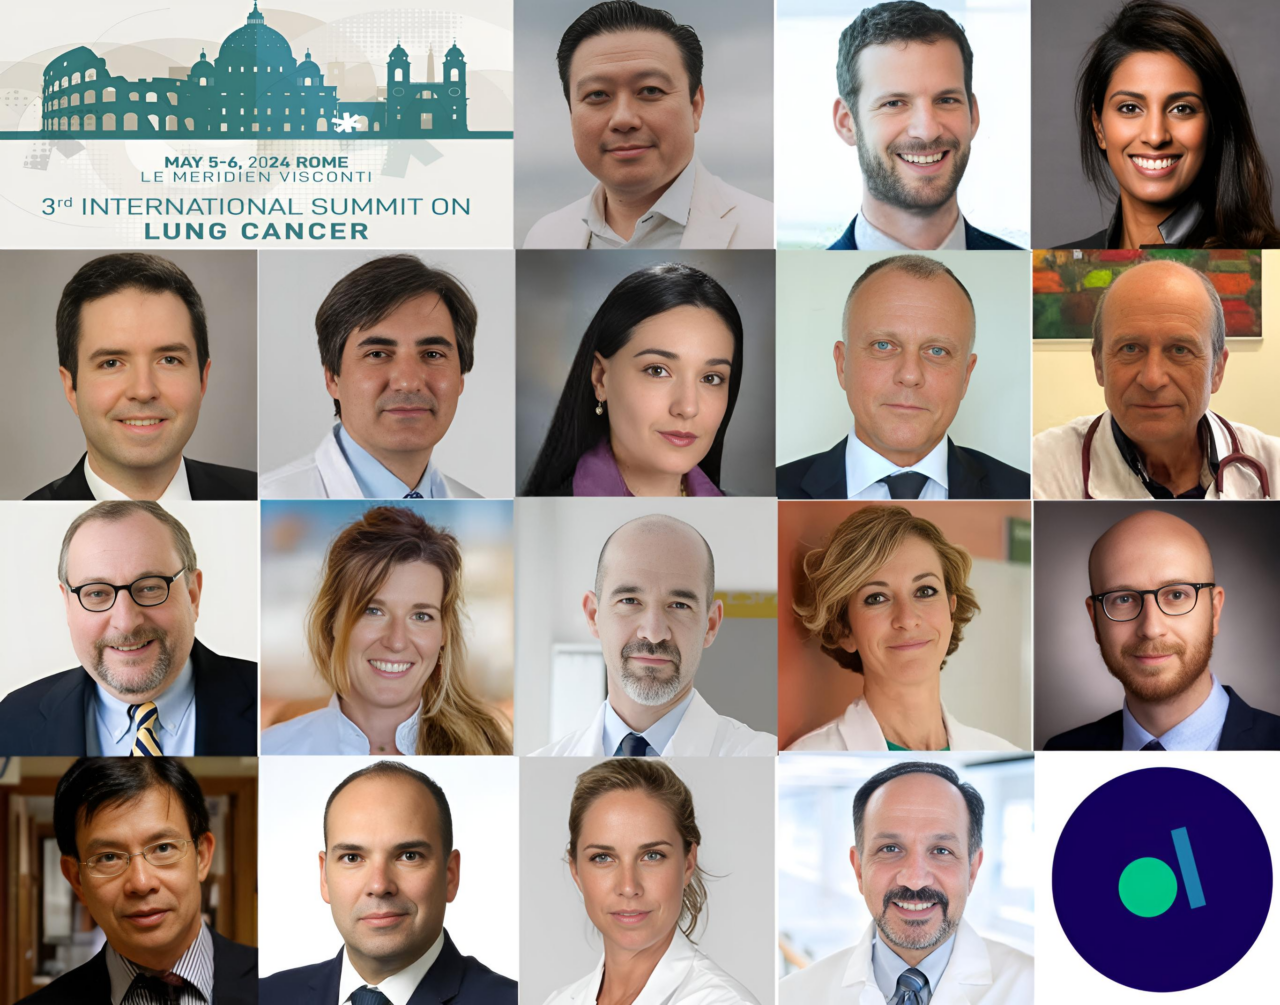 12 Posts Not To Miss From The 3rd International Summit on Lung Cancer!